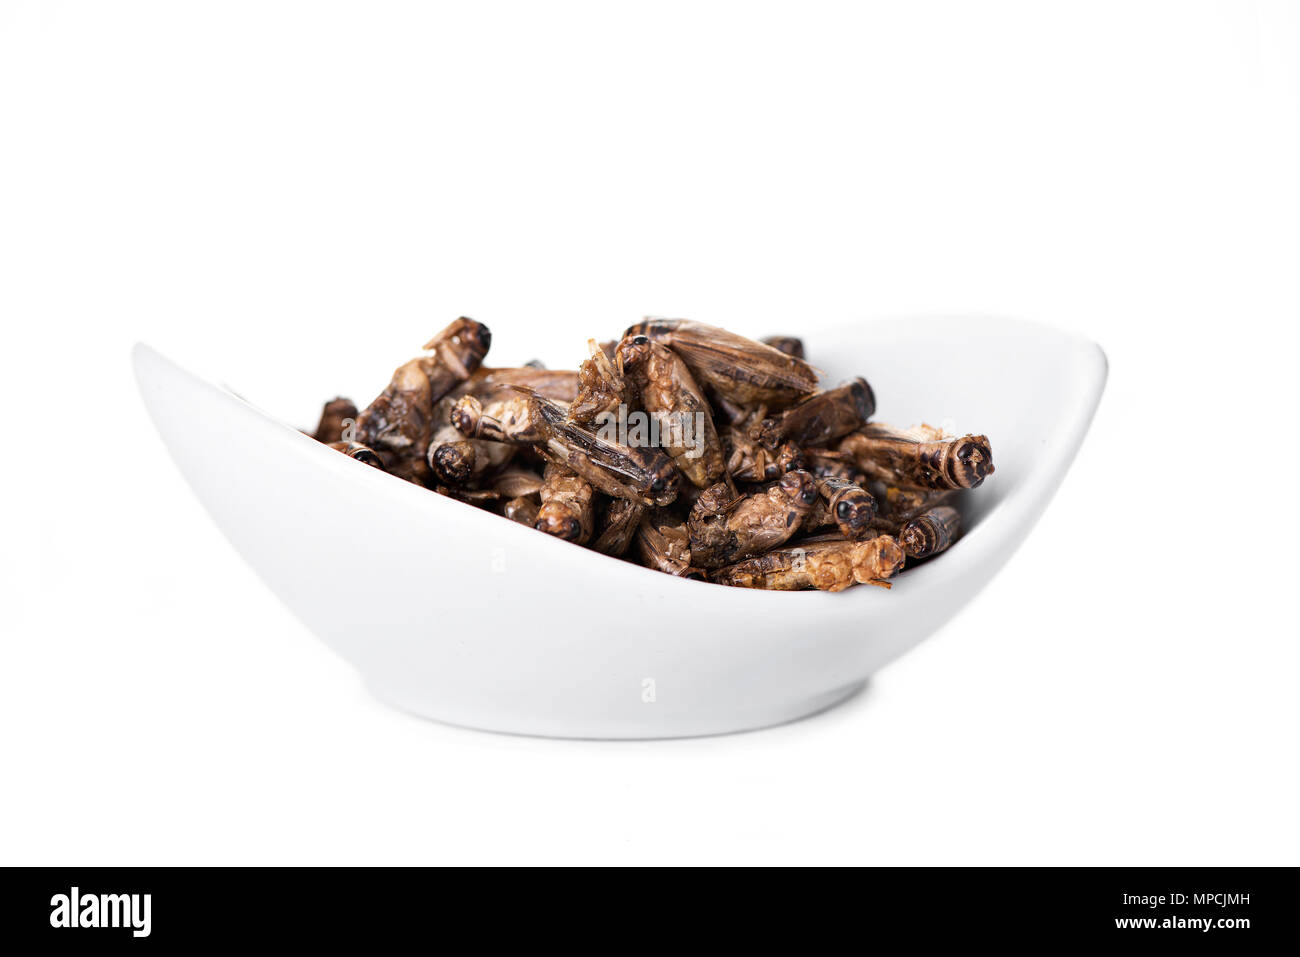 some fried crickets seasoned with onion and barbecue sauce in a white ceramic bowl, on a white background Stock Photo